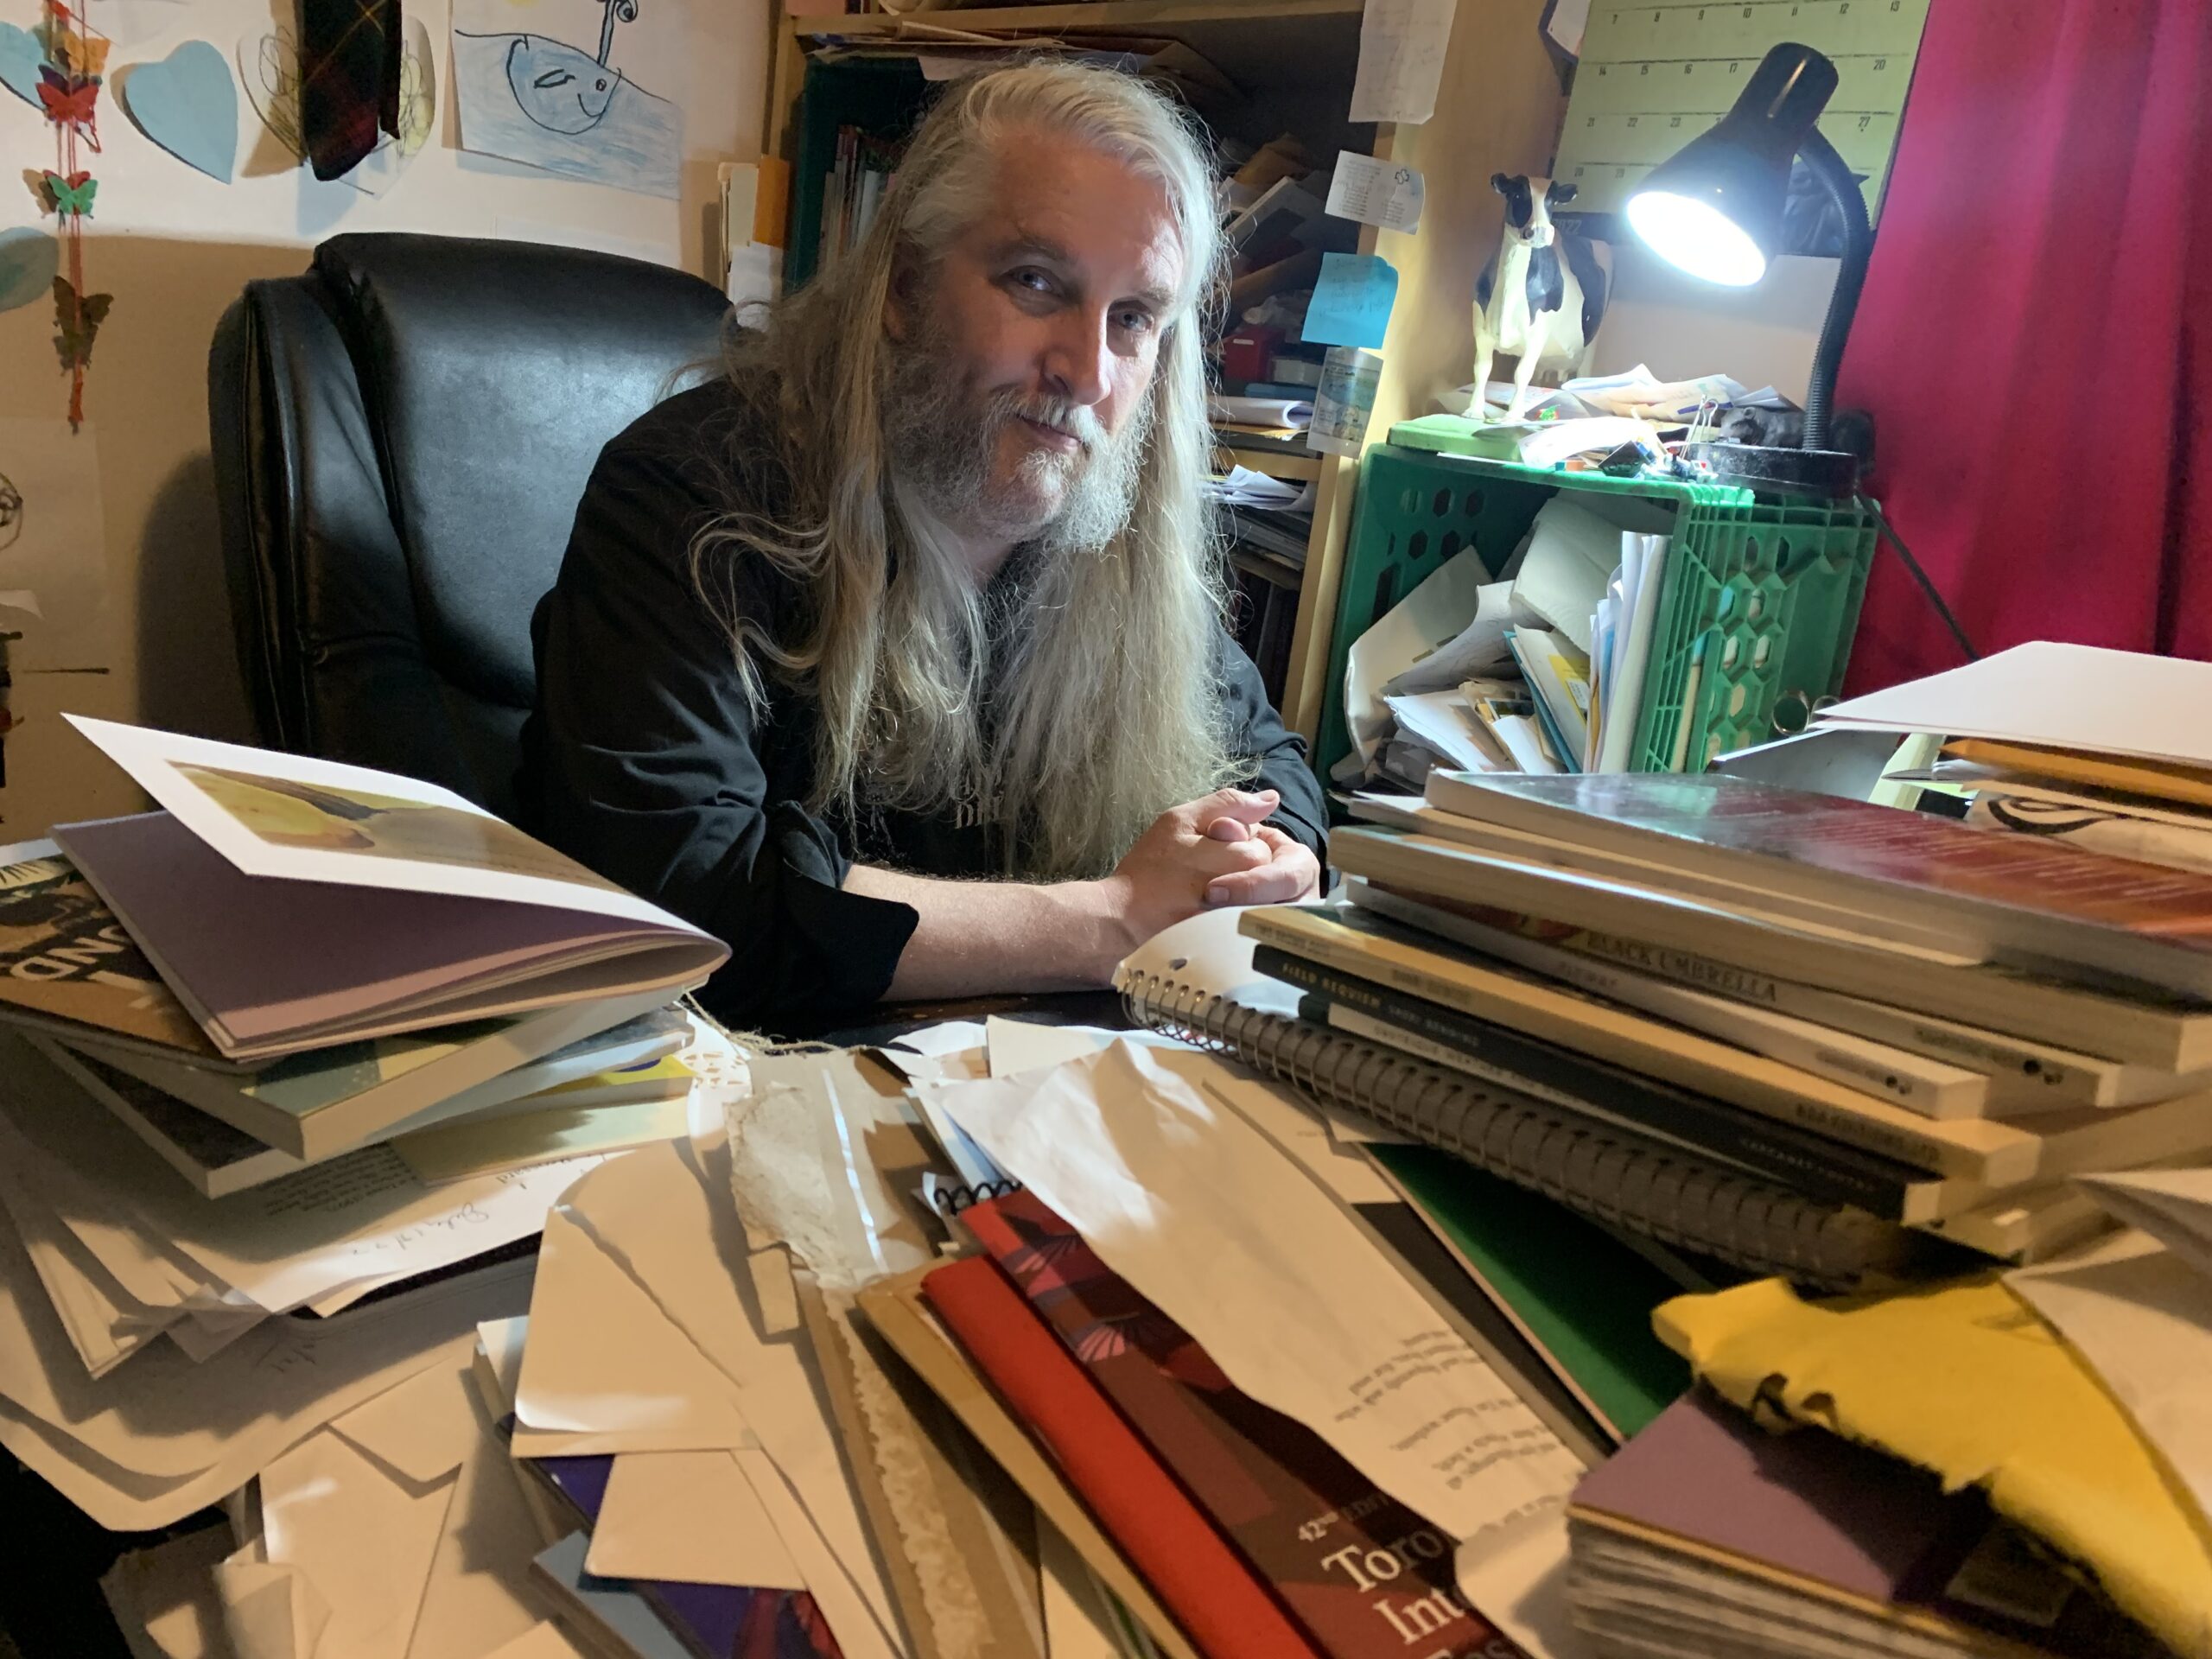 rob mclennan, with long hair grey hair, a short bushy beard, and a serious expression has been photographed across a mound of books and papers and chapbooks and zines; the photo is also at a slight dutch angle, which makes the perspective/the subject feel off-kilter and odd